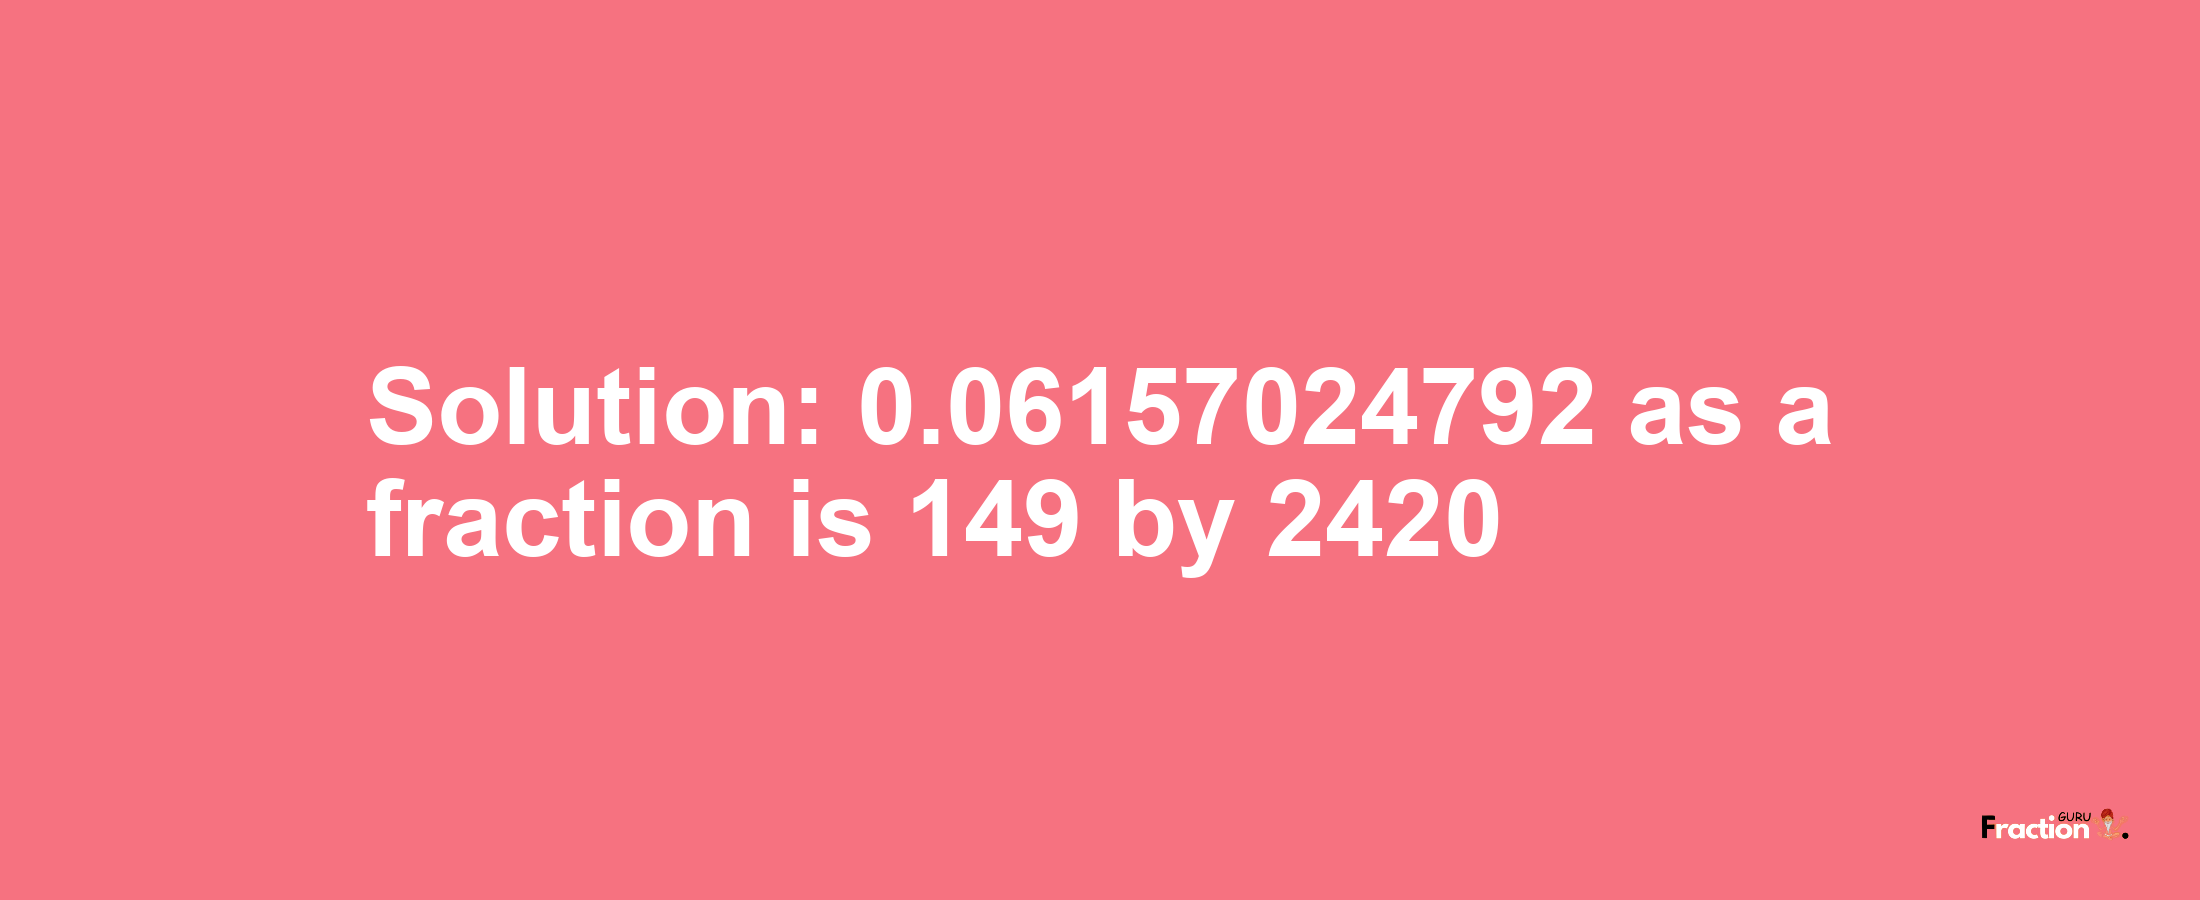 Solution:0.06157024792 as a fraction is 149/2420